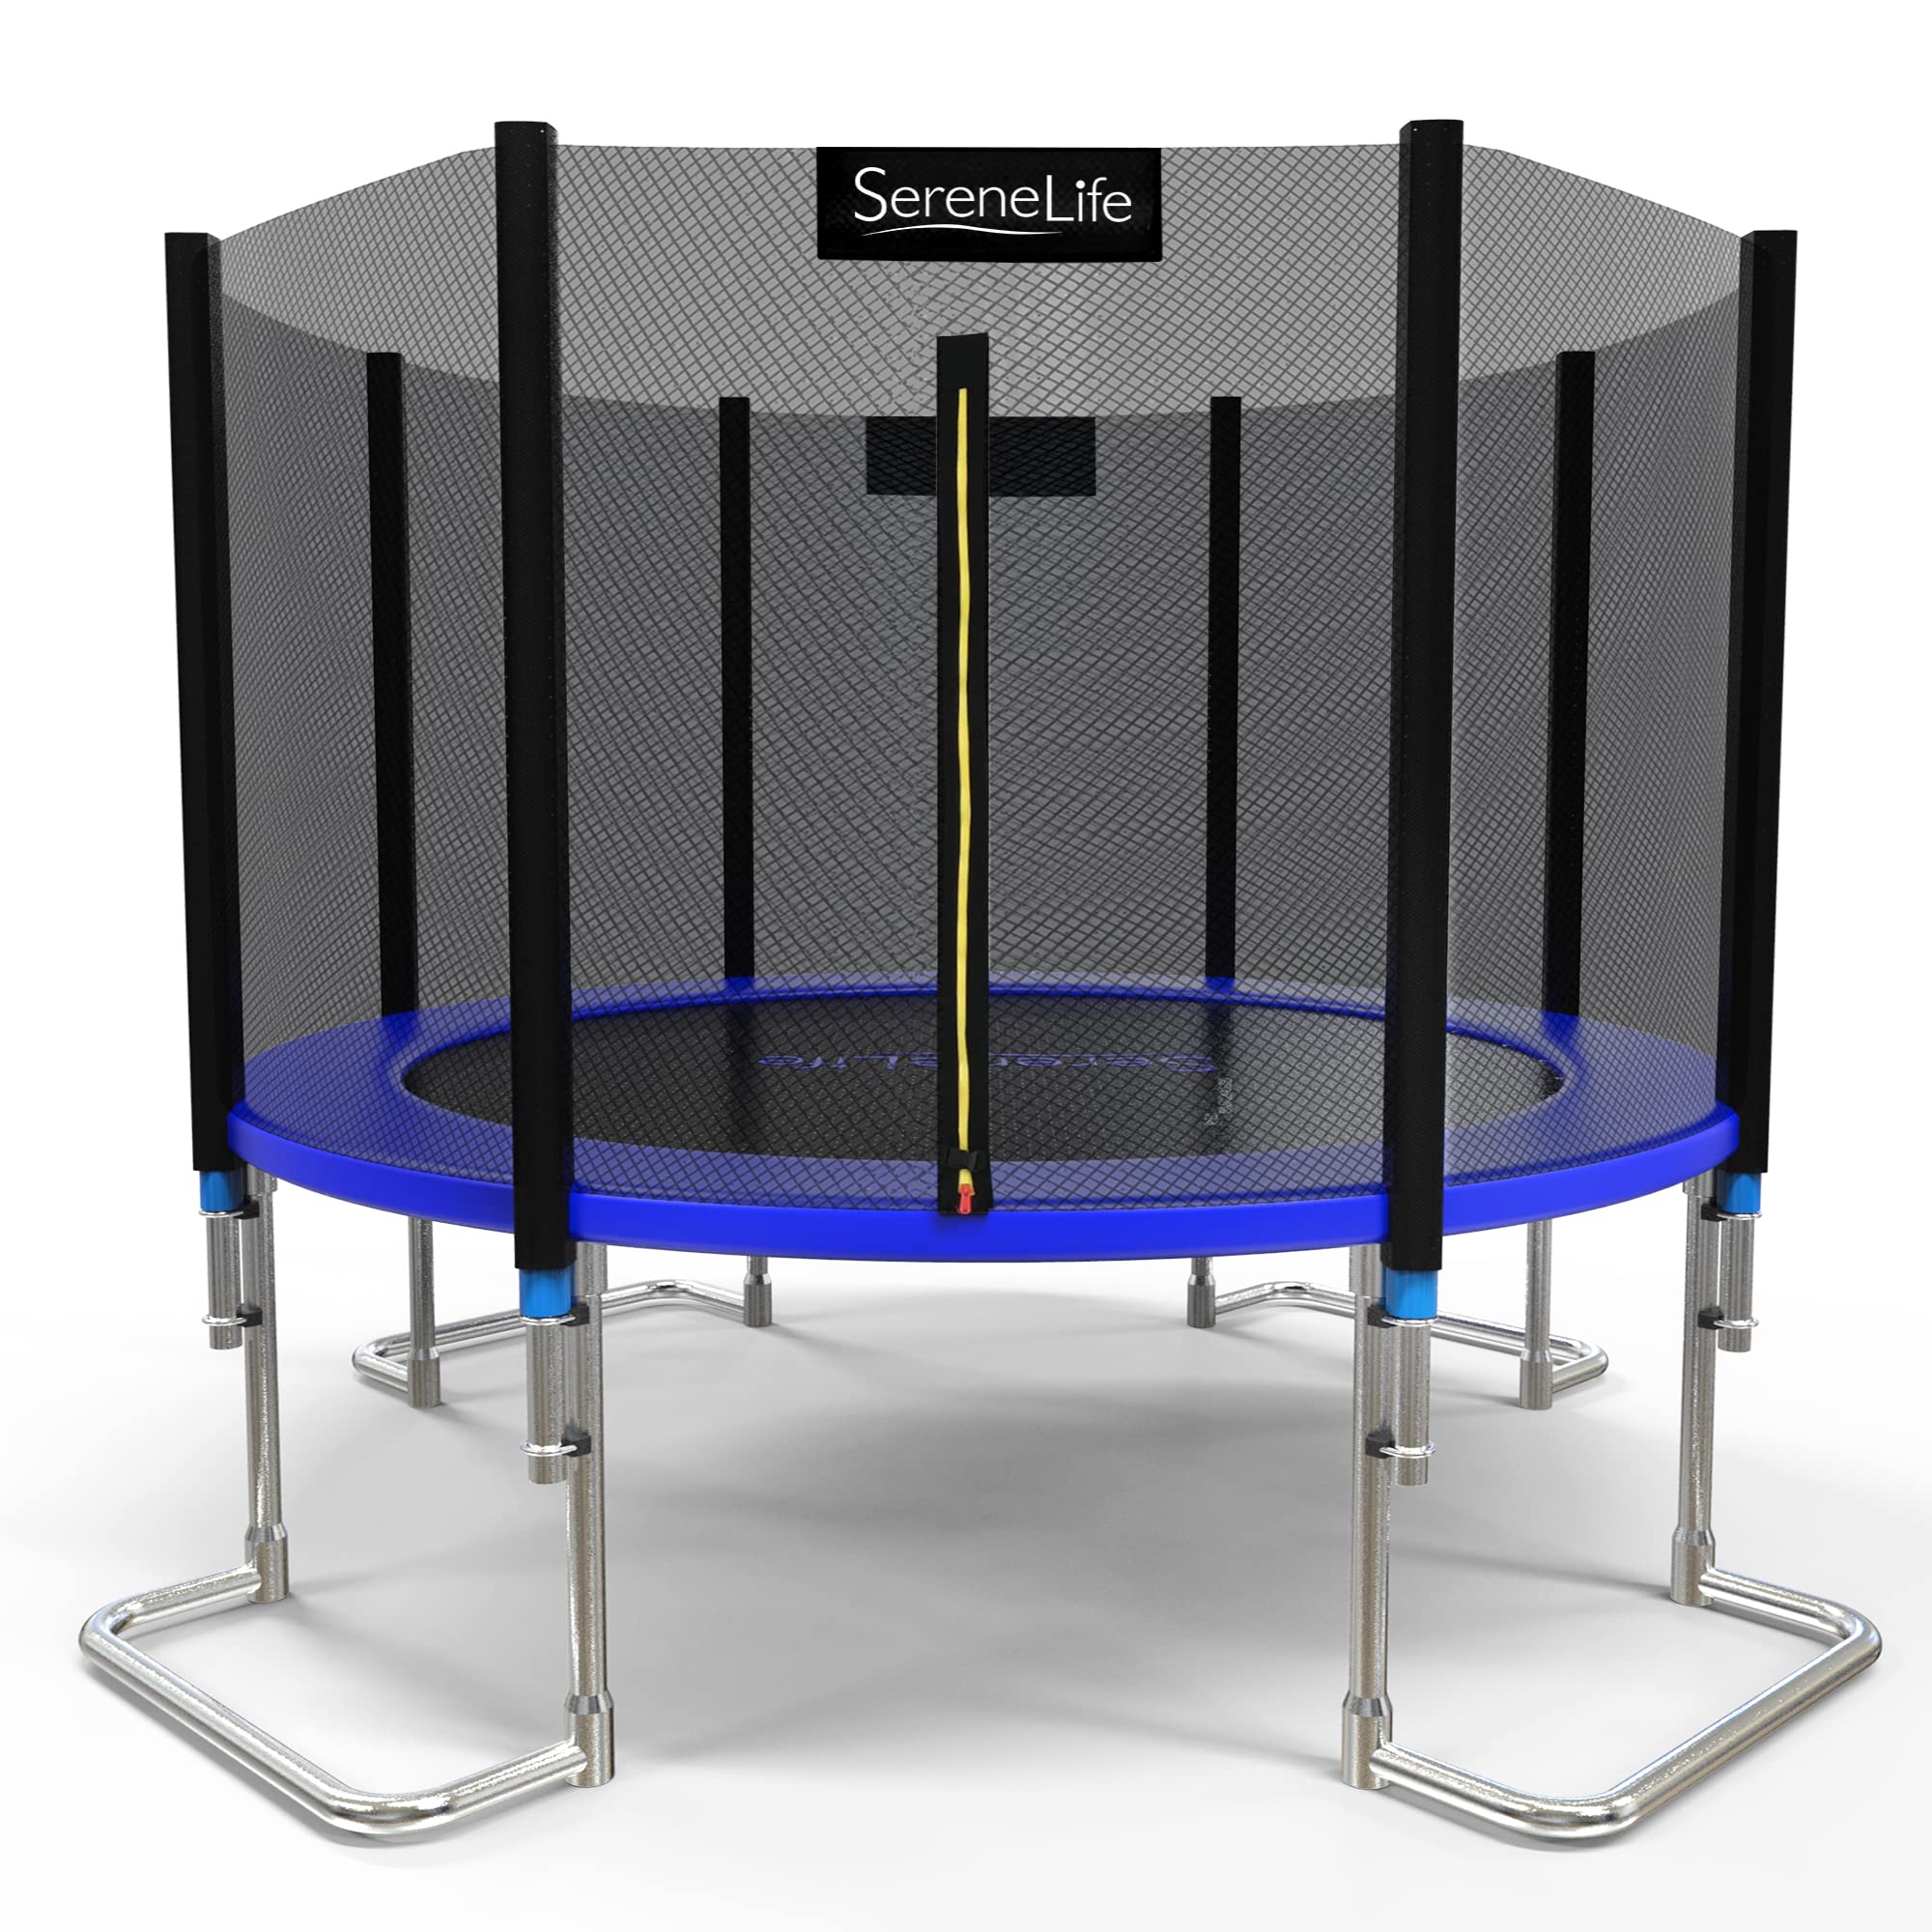 SereneLife ASTM Approved Trampoline with Net Enclosure - Stable, Strong Kids and Adult Trampoline with Net - Outdoor Trampoline 